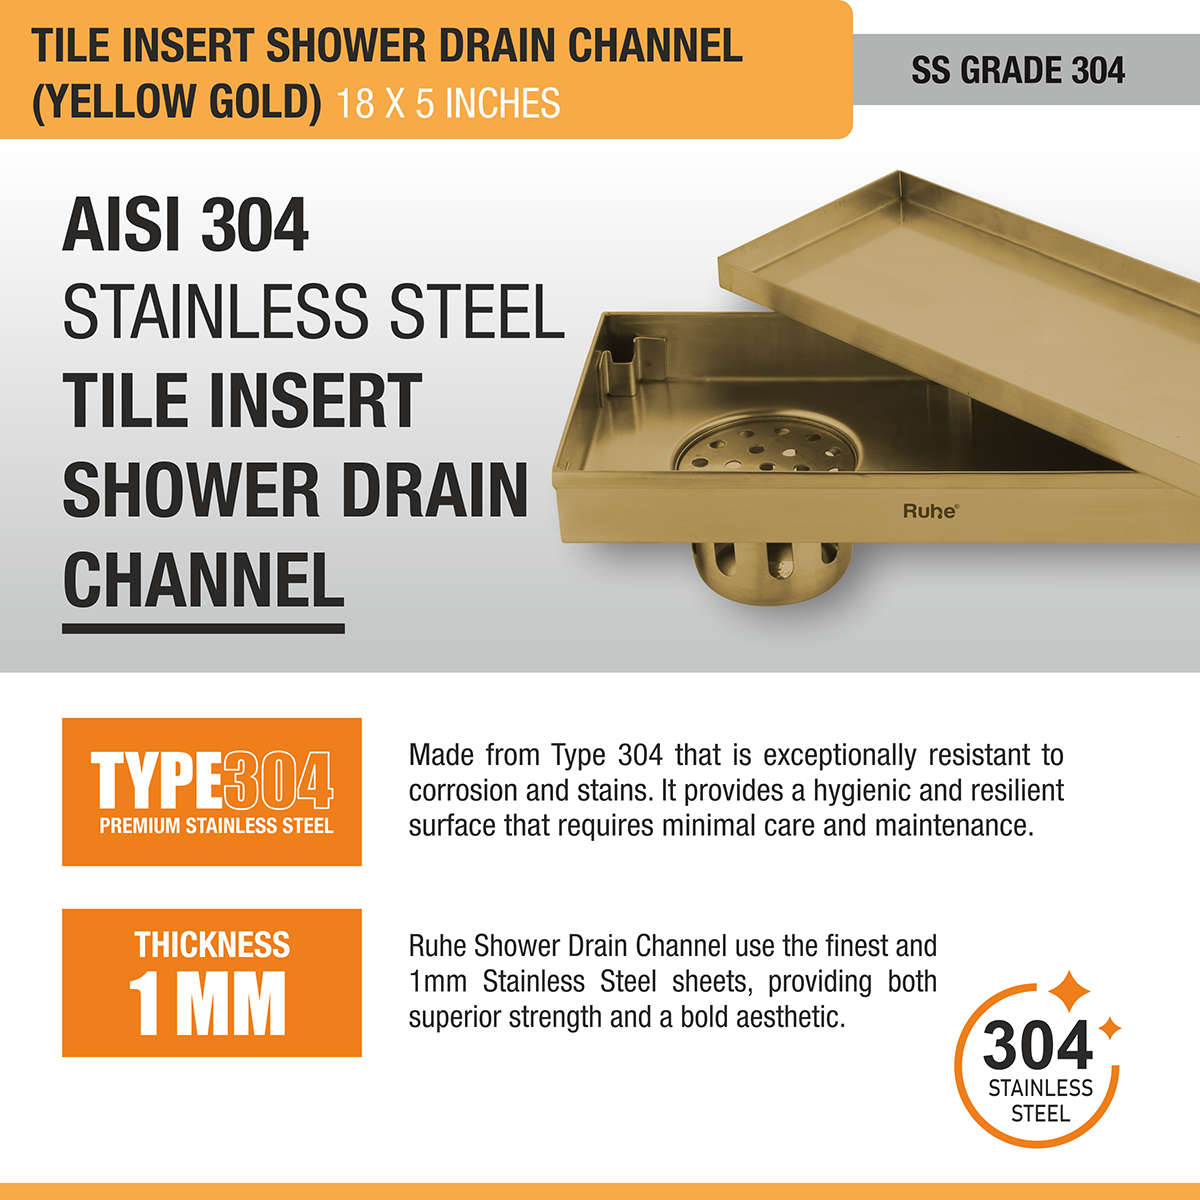 Tile Insert Shower Drain Channel (18 x 5 Inches) YELLOW GOLD PVD Coated stainless steel